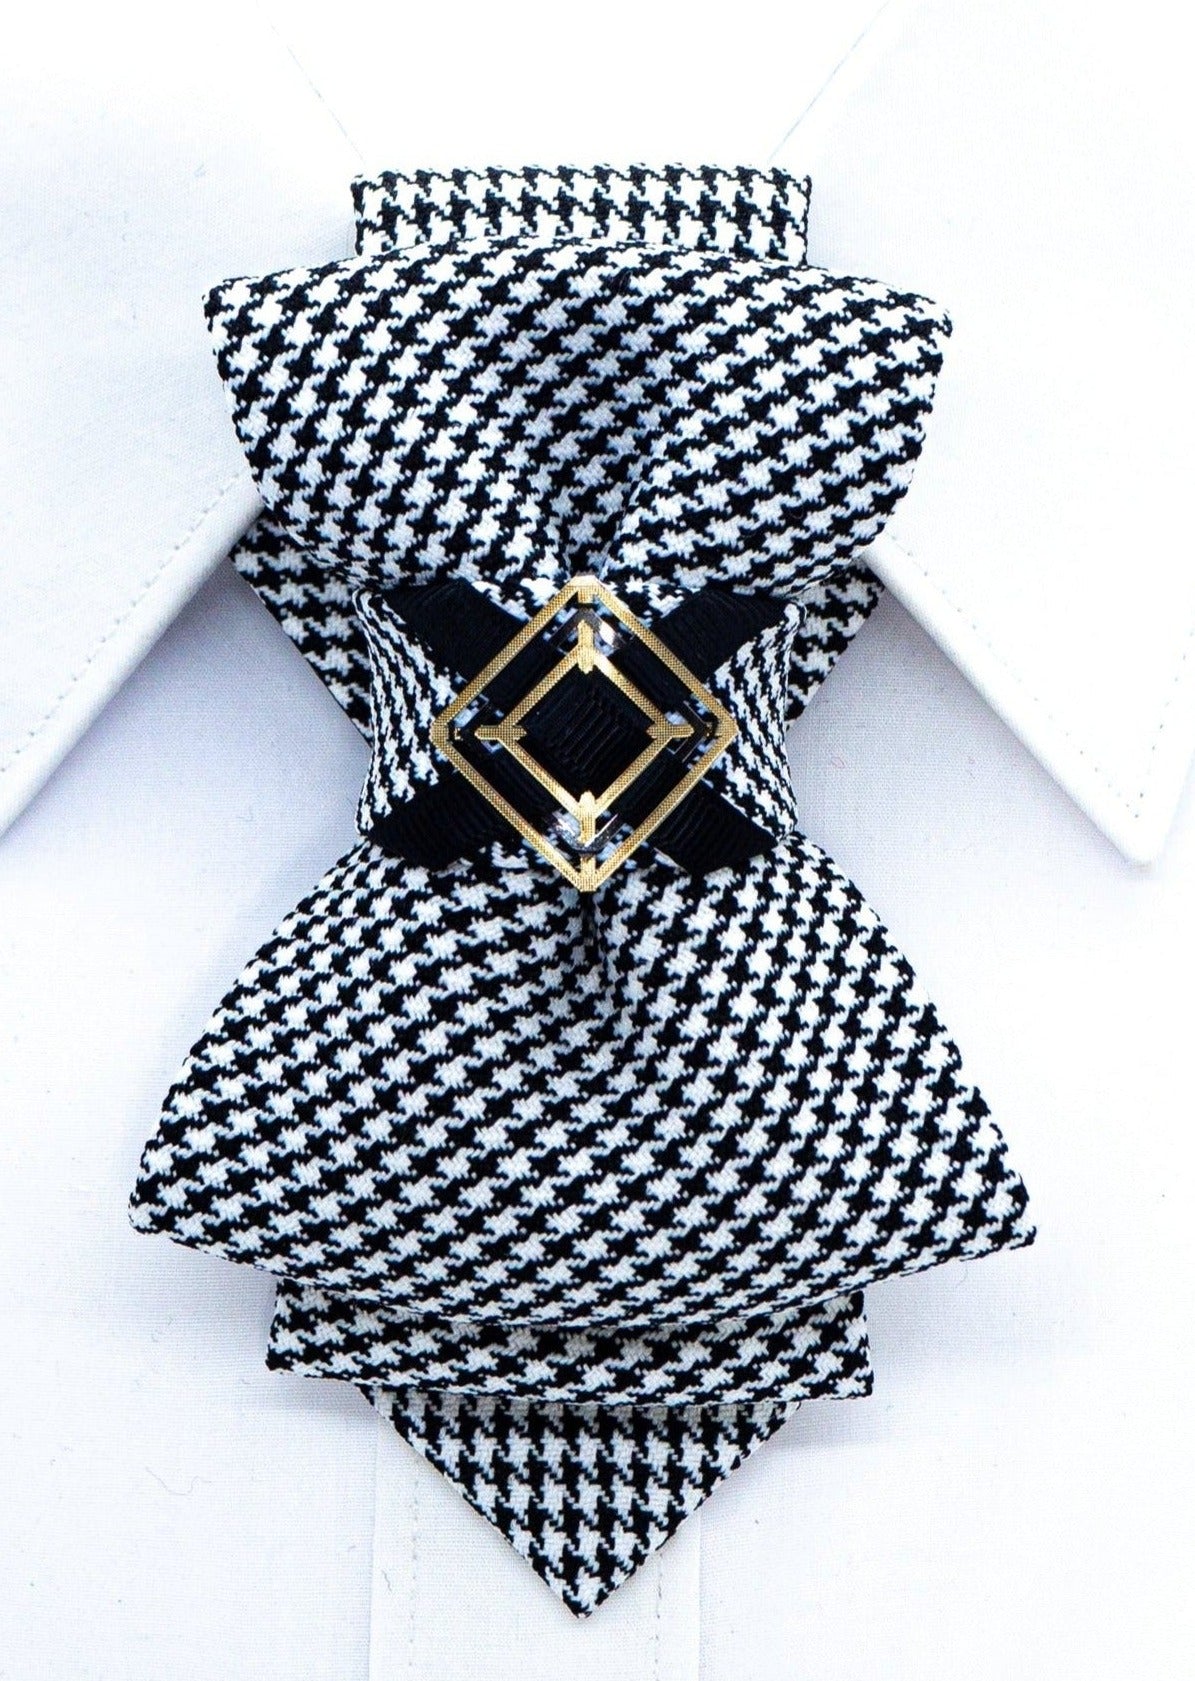 Tie for women, Black and White necktie for lady, LADIES BOW TIE